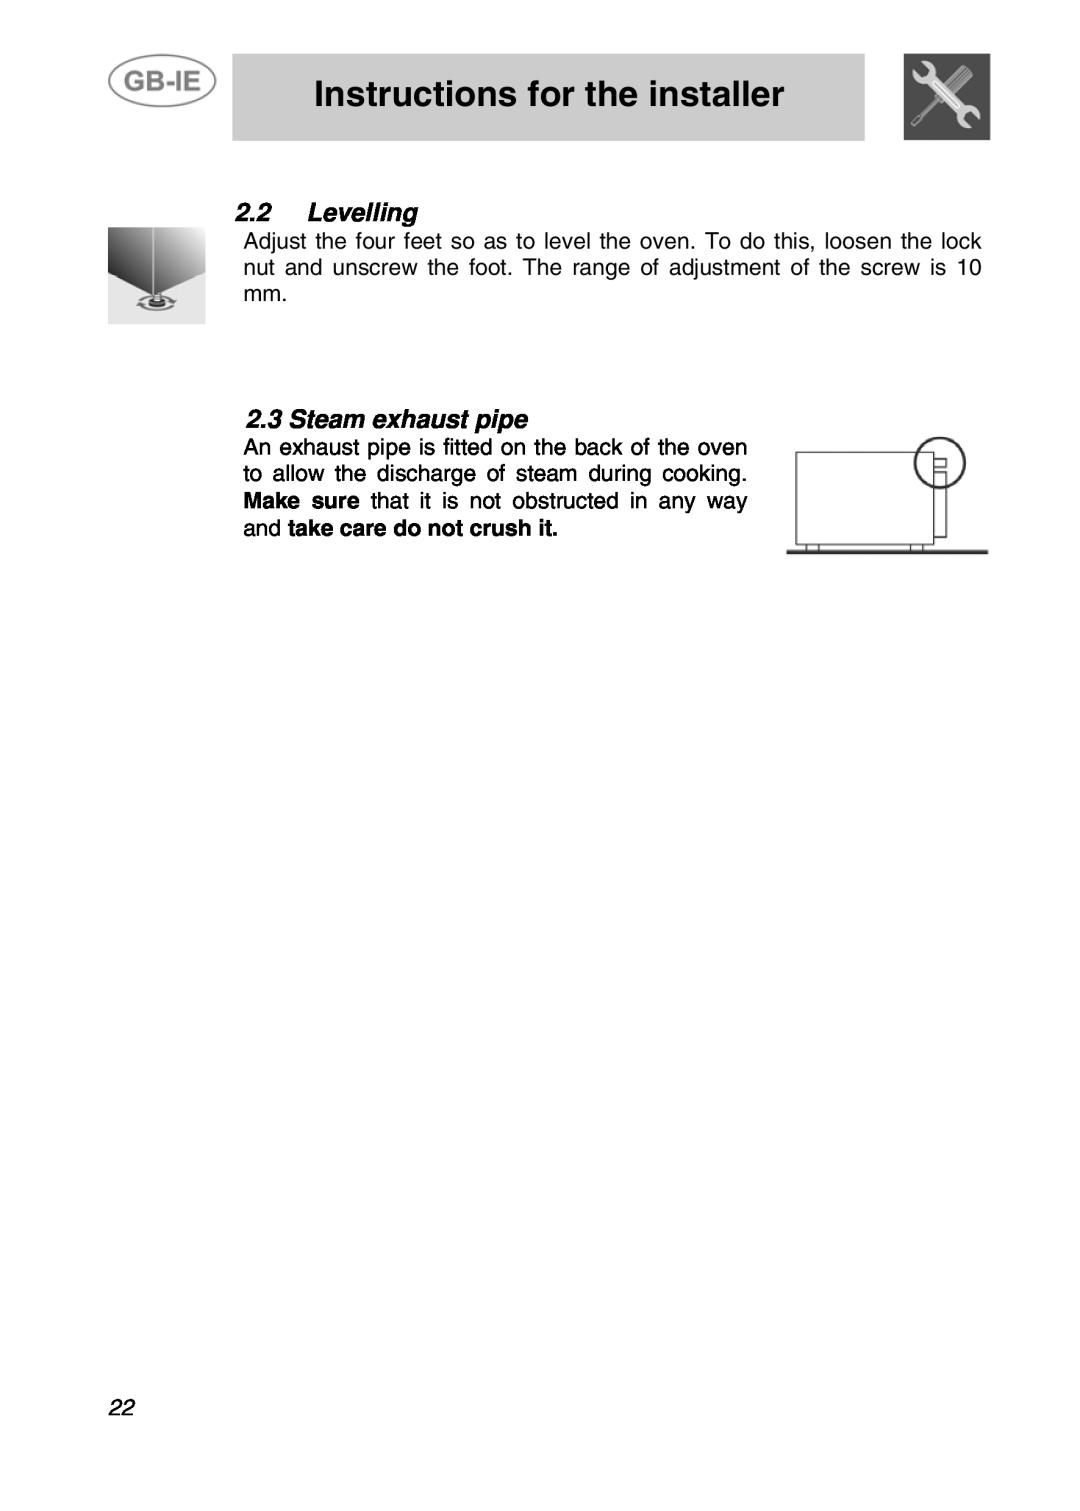 Smeg ALFA31XE manual Levelling, Steam exhaust pipe, Instructions for the installer 